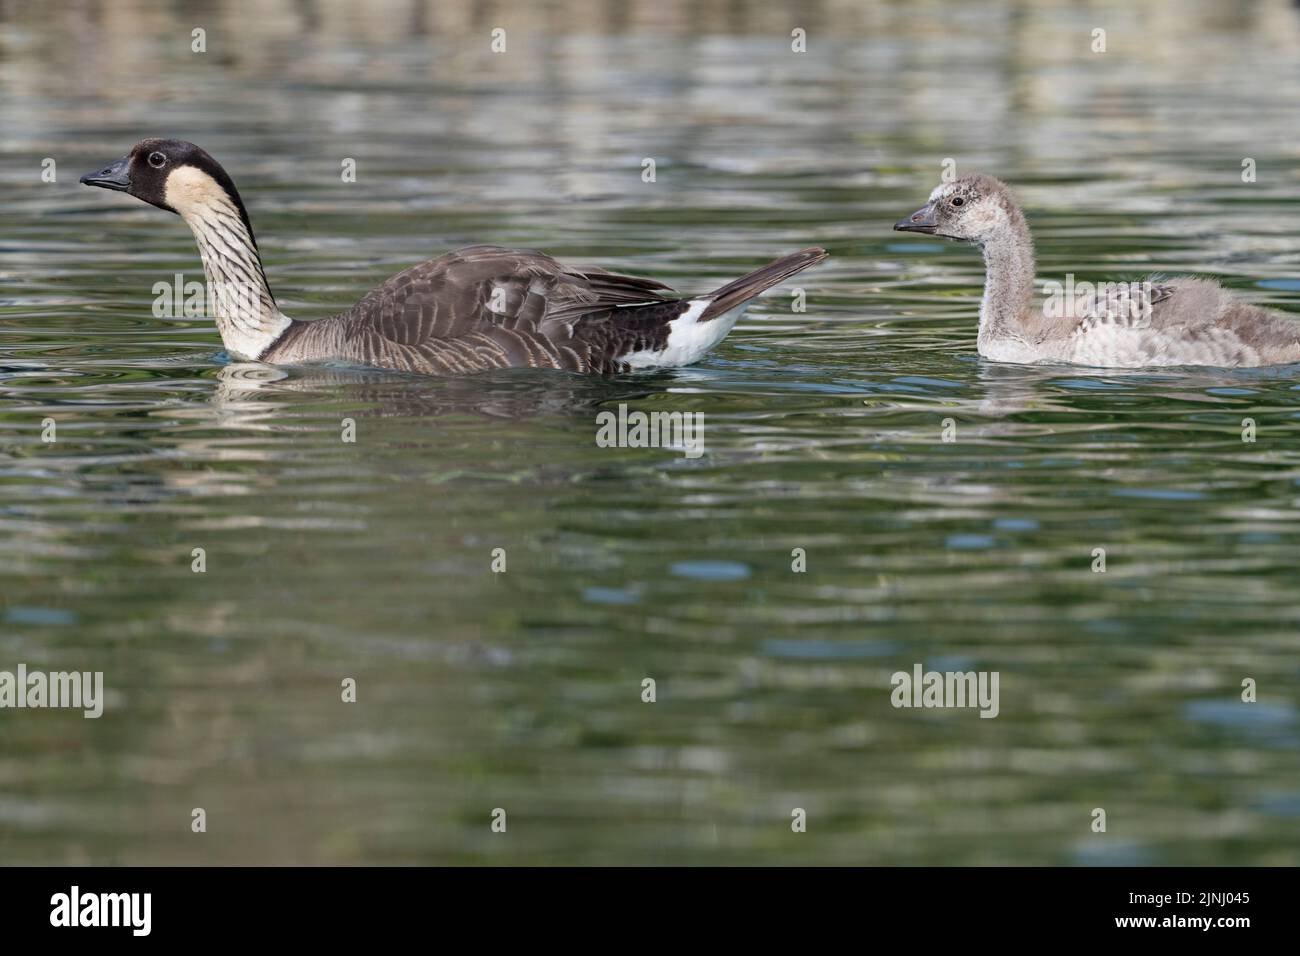 nene or Hawaiian goose, Branta sandvicensis ( endemic species ), the world's rarest goose, adult swimming with large chick or gosling, Kona, Hawaii Stock Photo